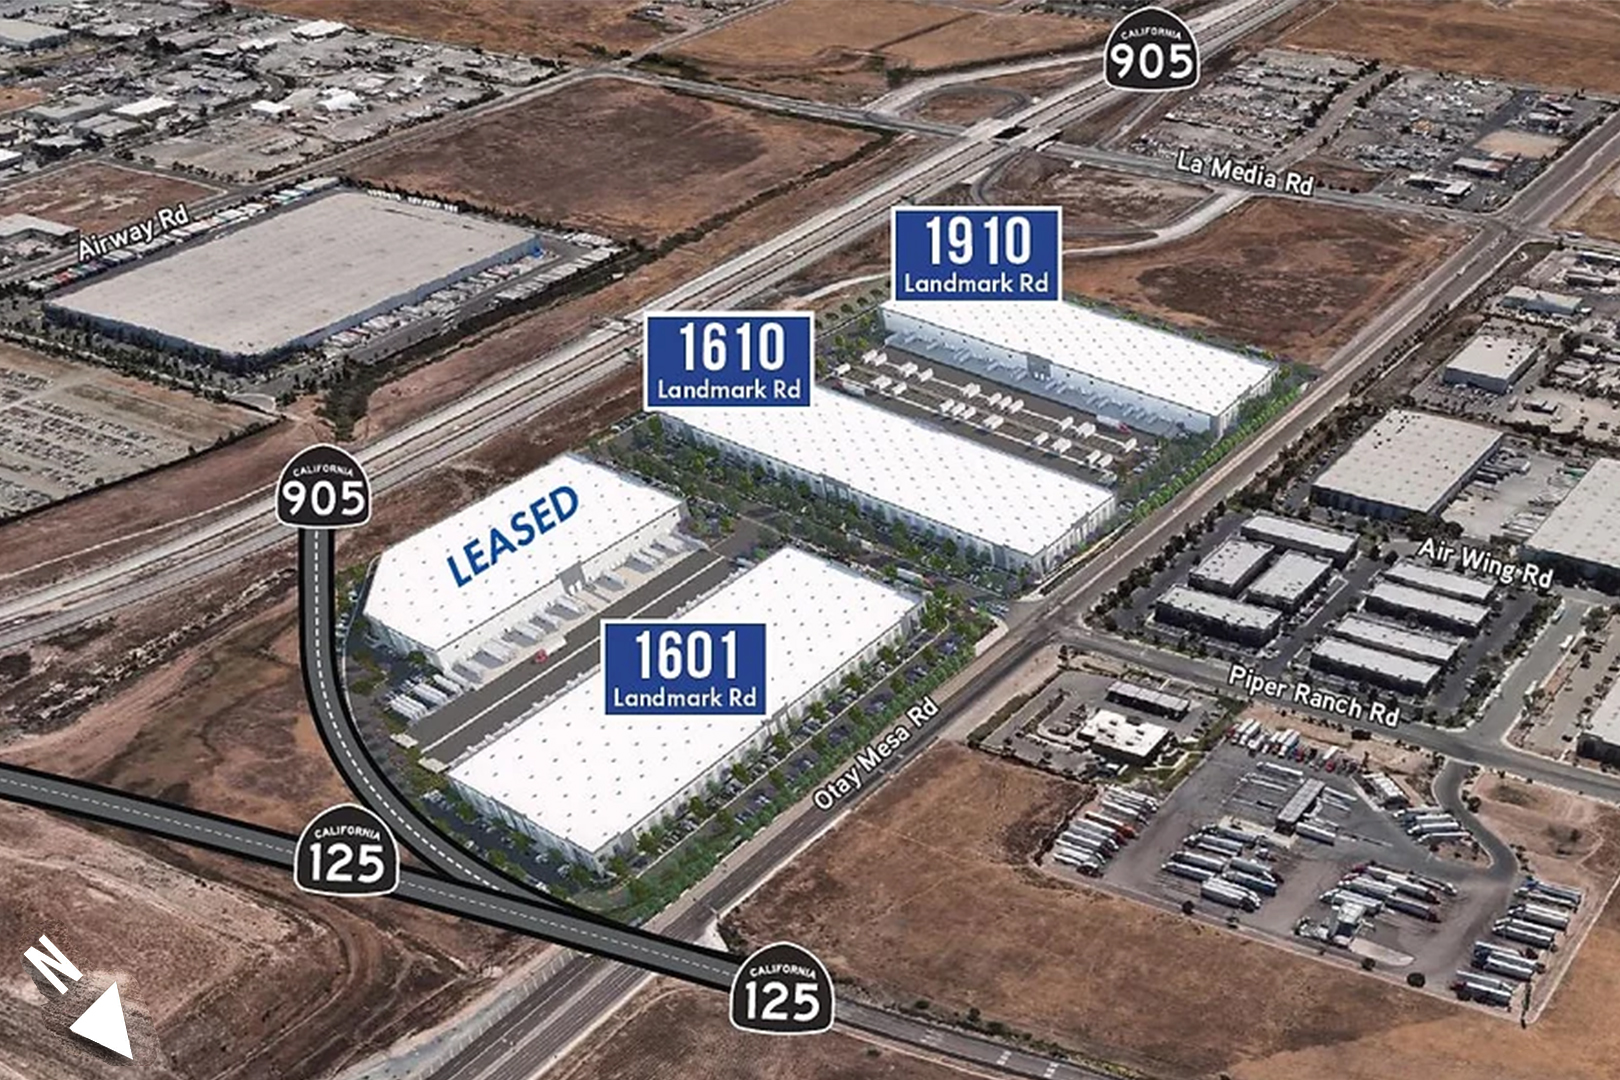 Developers expand next phase for Landmark at Otay with more than 1.1 million square feet of Class-A spec buildings